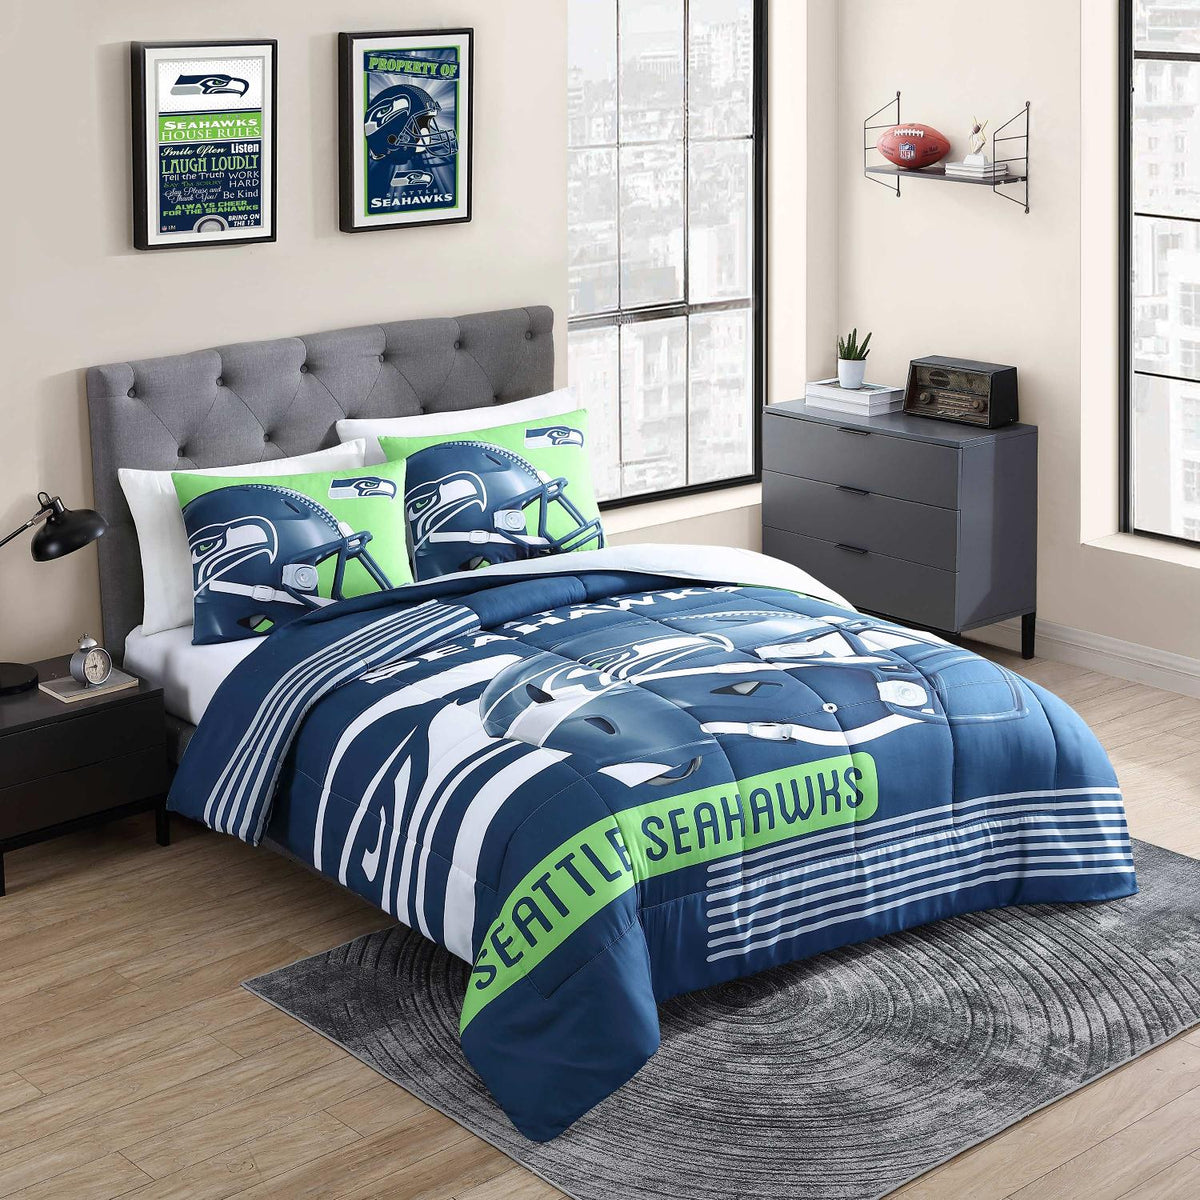 Seattle Seahawks NFL Officially Licensed 3-Piece Comforter Set - Bed